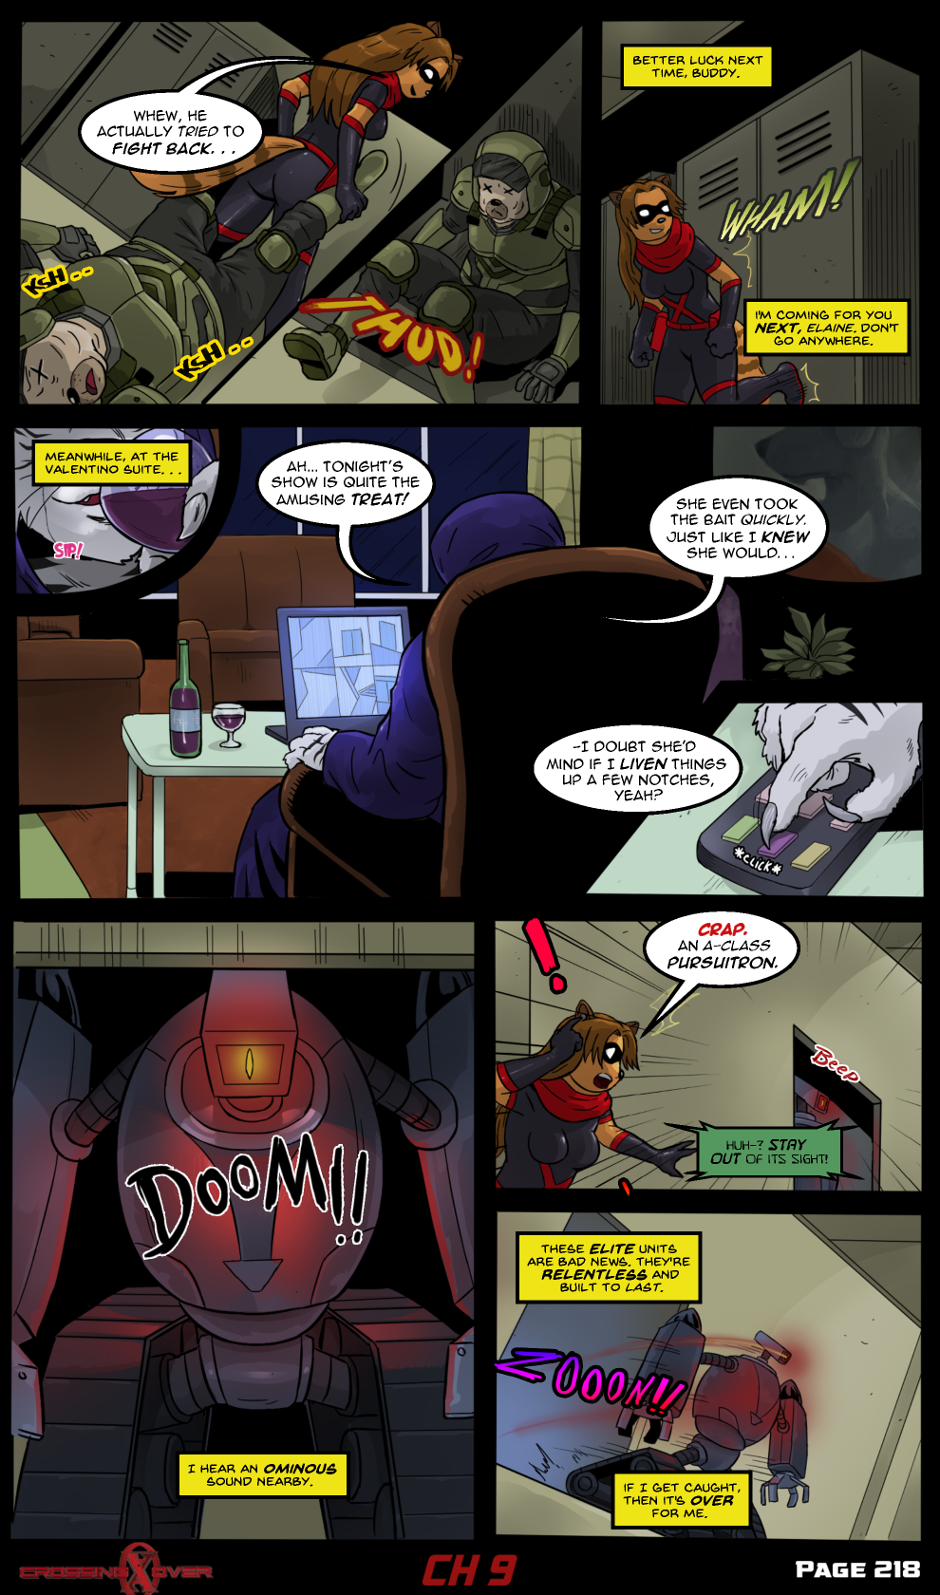 Page 218 (Ch 9)